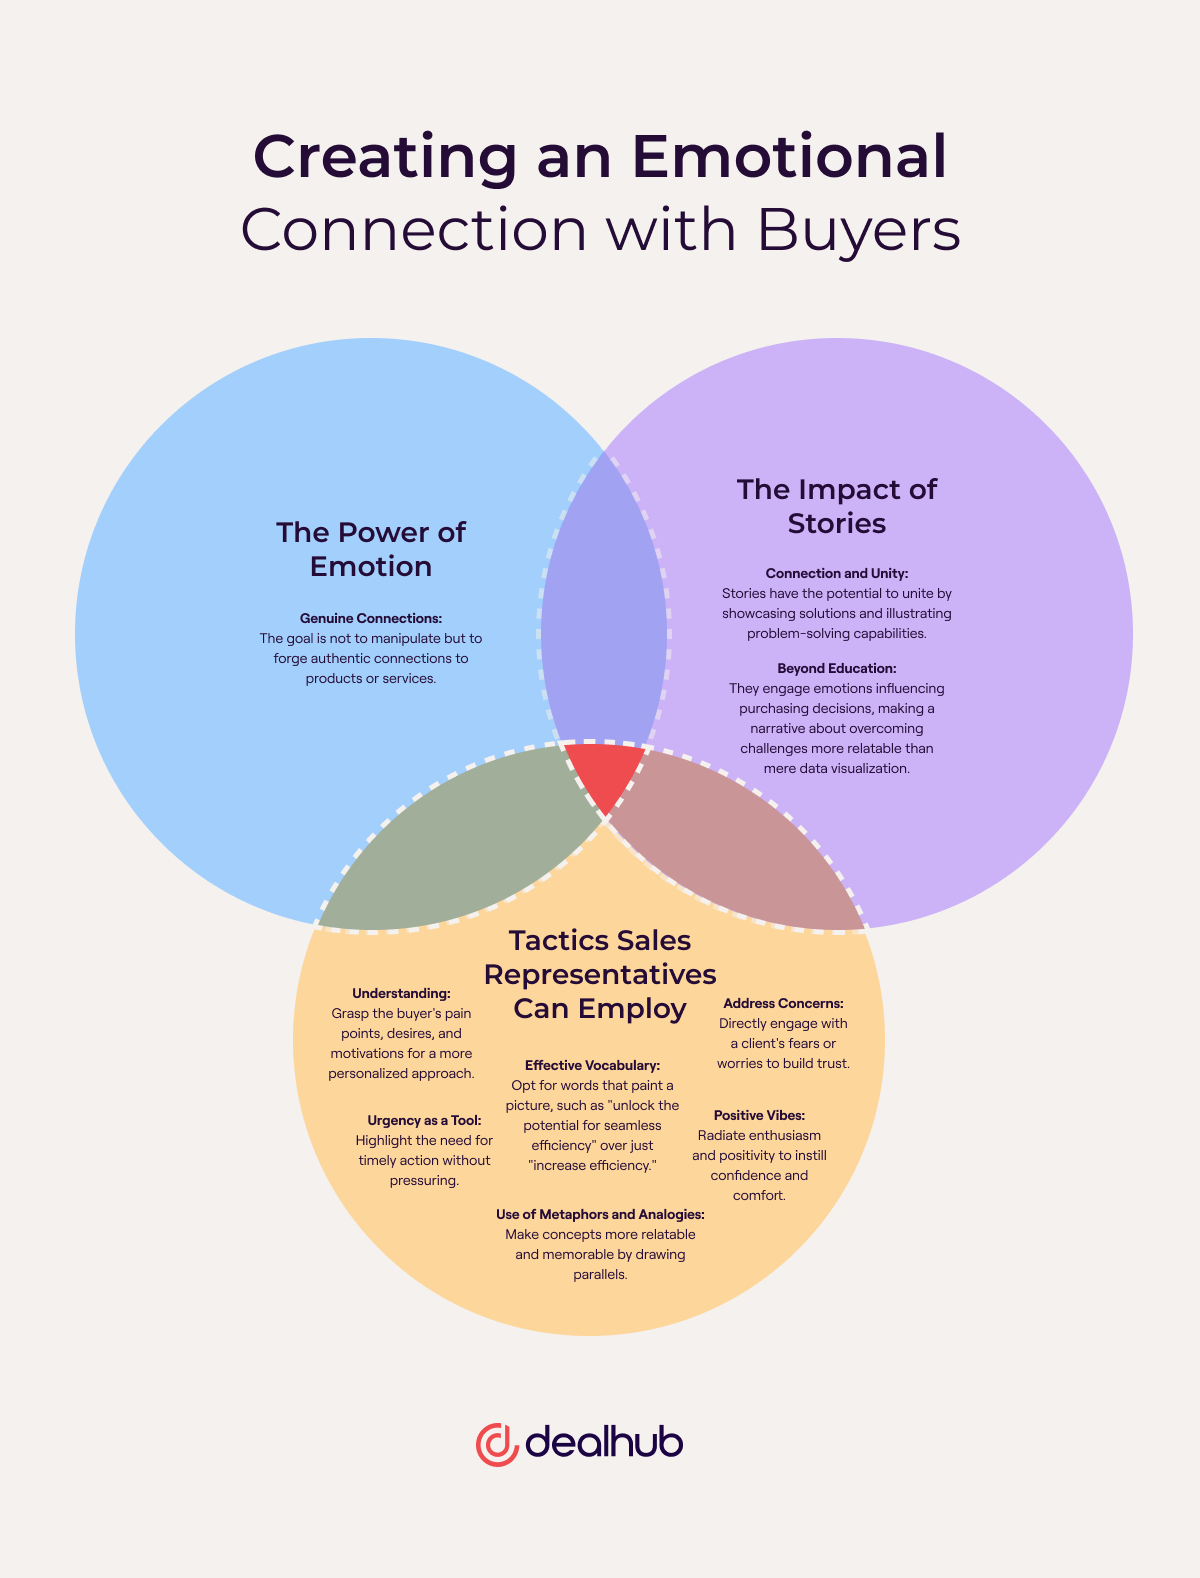 Creating an emotional connection with buyers